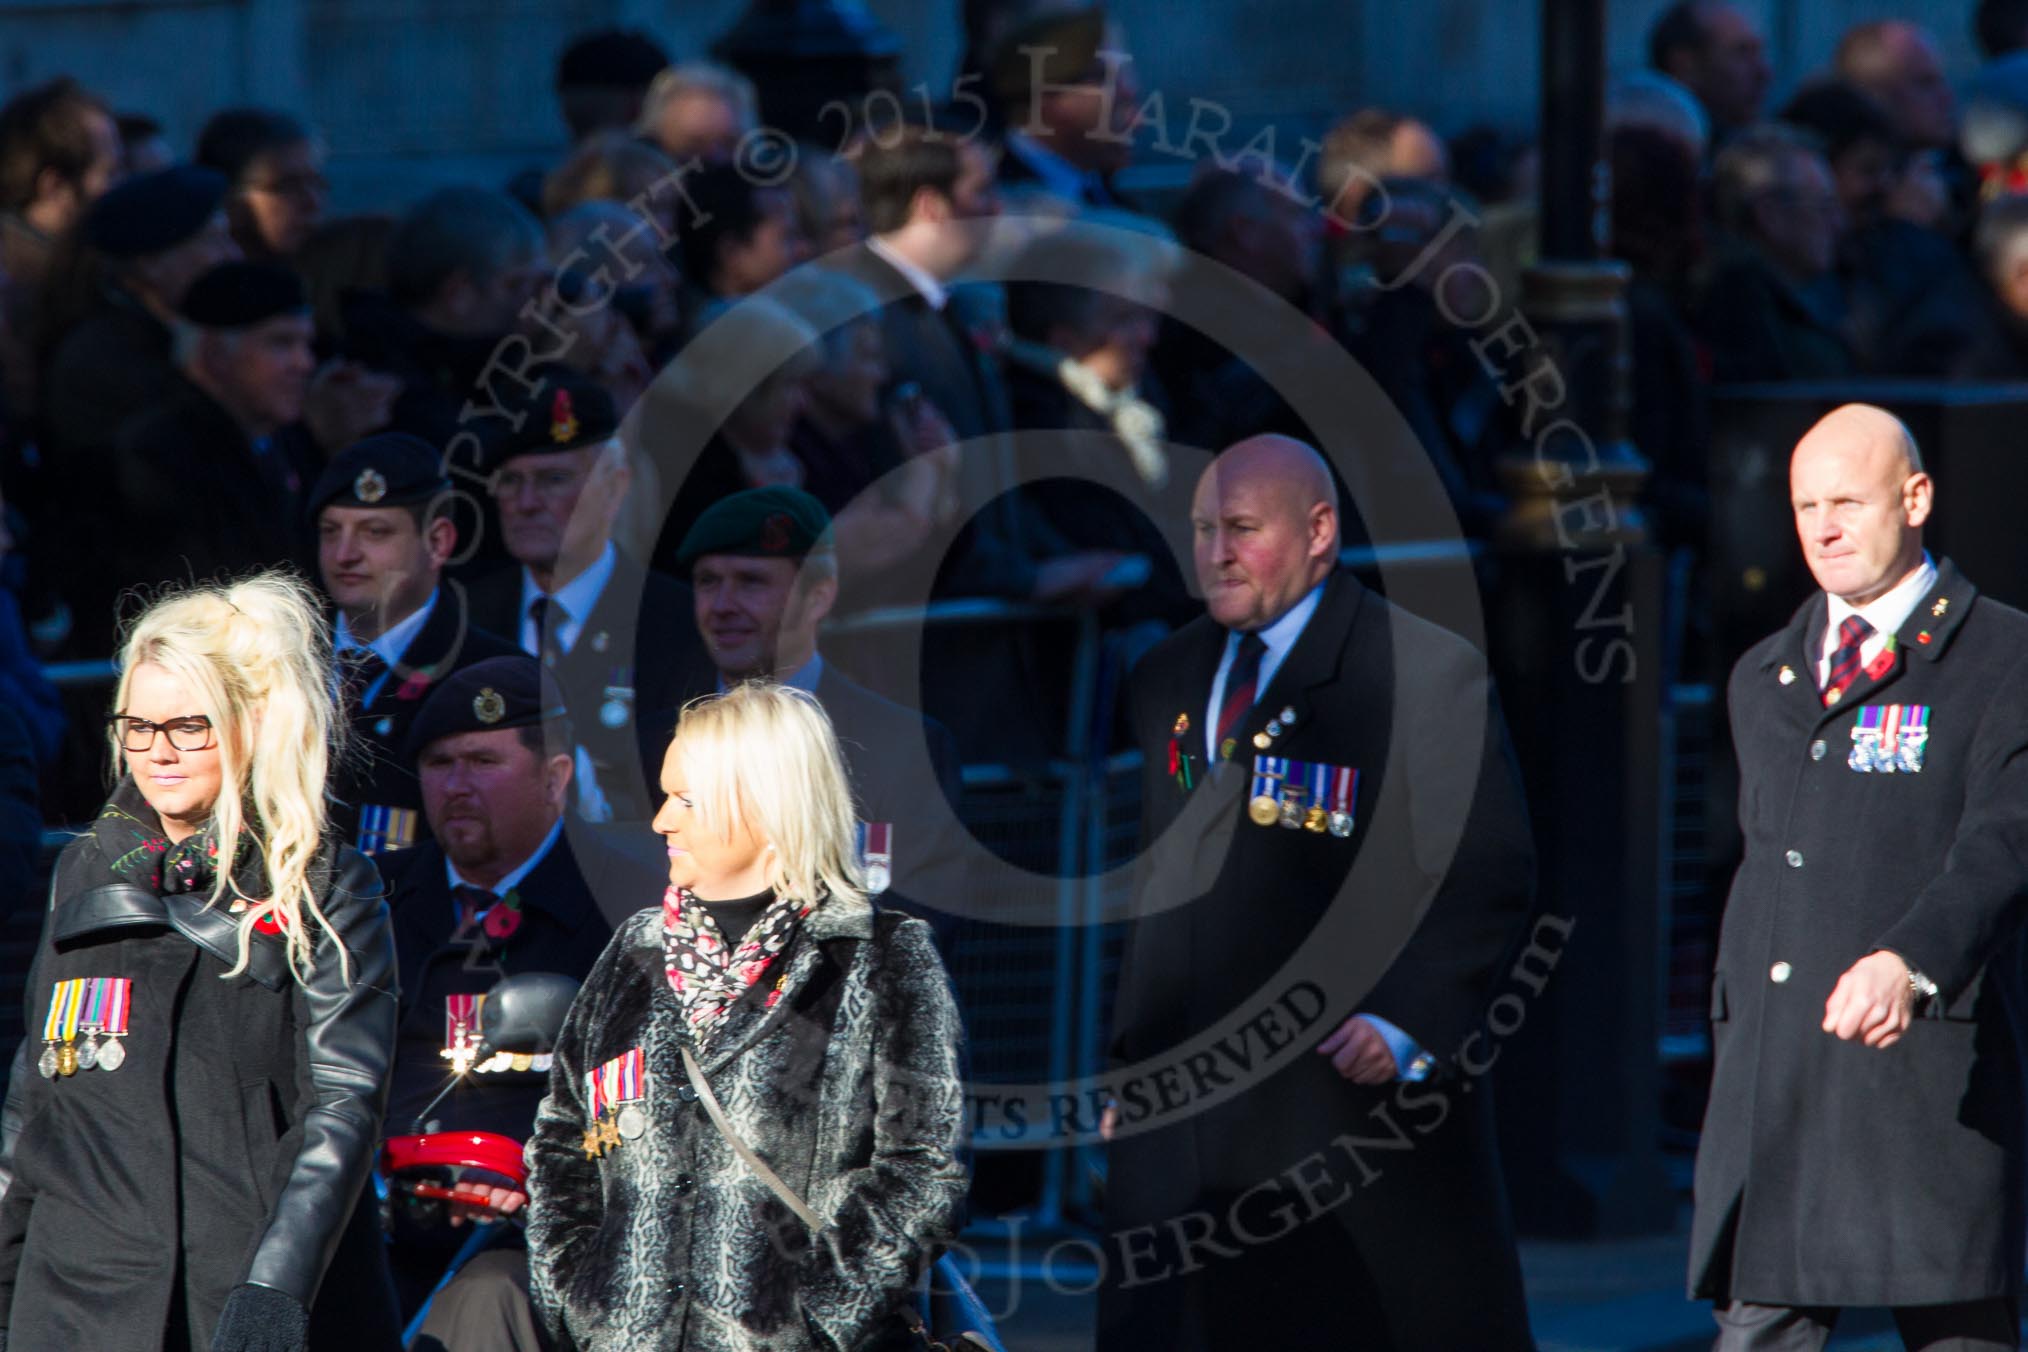 Remembrance Sunday Cenotaph March Past 2013: B20 - Royal Engineers Association..
Press stand opposite the Foreign Office building, Whitehall, London SW1,
London,
Greater London,
United Kingdom,
on 10 November 2013 at 12:01, image #1464